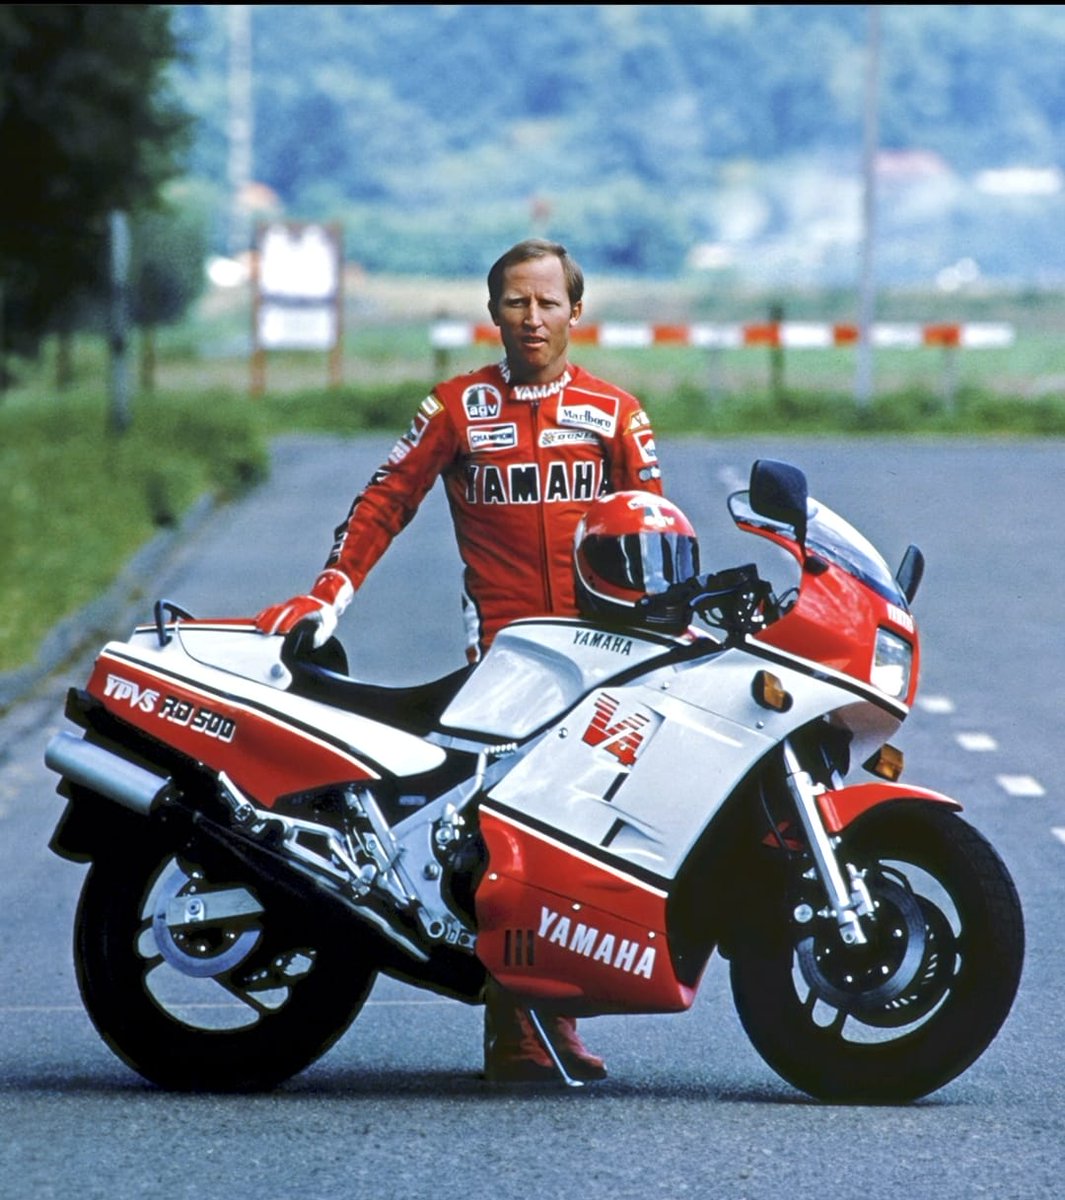 Who was a fan of Kenny Roberts and what was your favourite memory of him on the track? #classicbike #classicbikes #classicbikeshow #classicbikers #classicmotorbike #classicmotorcycles #classicmotorcycleshows #classicmotorcycleclub